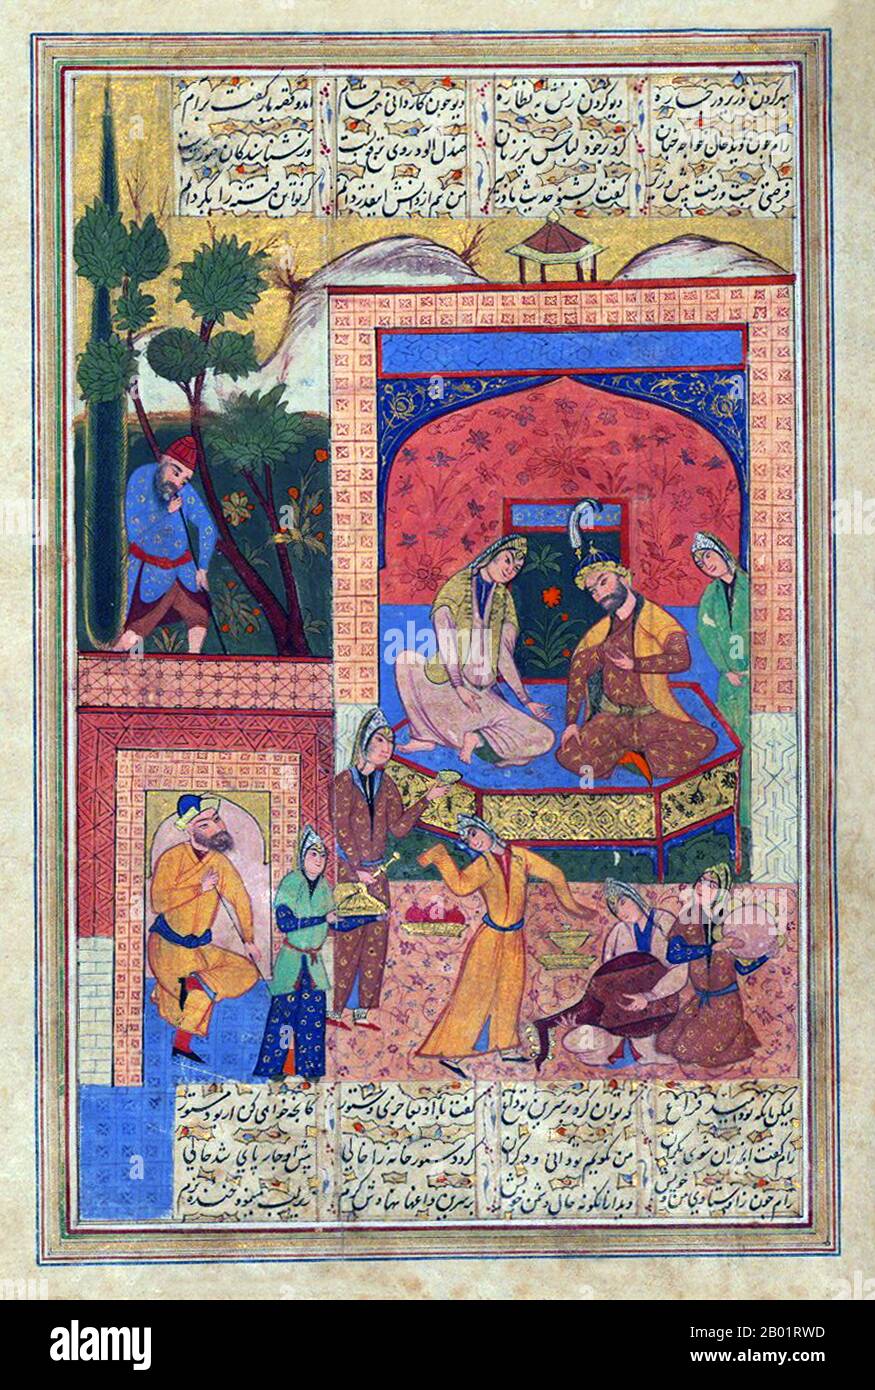 Iran: Sassanid Prince Bahram Gur (400-438) in the Sandalwood Pavilion. Miniature painting from a later edition of Amir Khusraw's (1253-1325) 'Hasht-Bihisht' (Eight Paradises), c. 1609.  Bahram V was the 14th Sassanid King of Persia (r. 421-438). Also called Bahram Gur or Bahramgur, he was a son of Yazdegerd I, after whose sudden death (or assassination) he gained the crown against the opposition of the grandees by the help of Mundhir, the Arab dynast of al-Hirah.  Sandalwood is the name of a class of fragrant woods from trees in the genus Santalum. The woods are heavy, yellow and fine-grained. Stock Photo